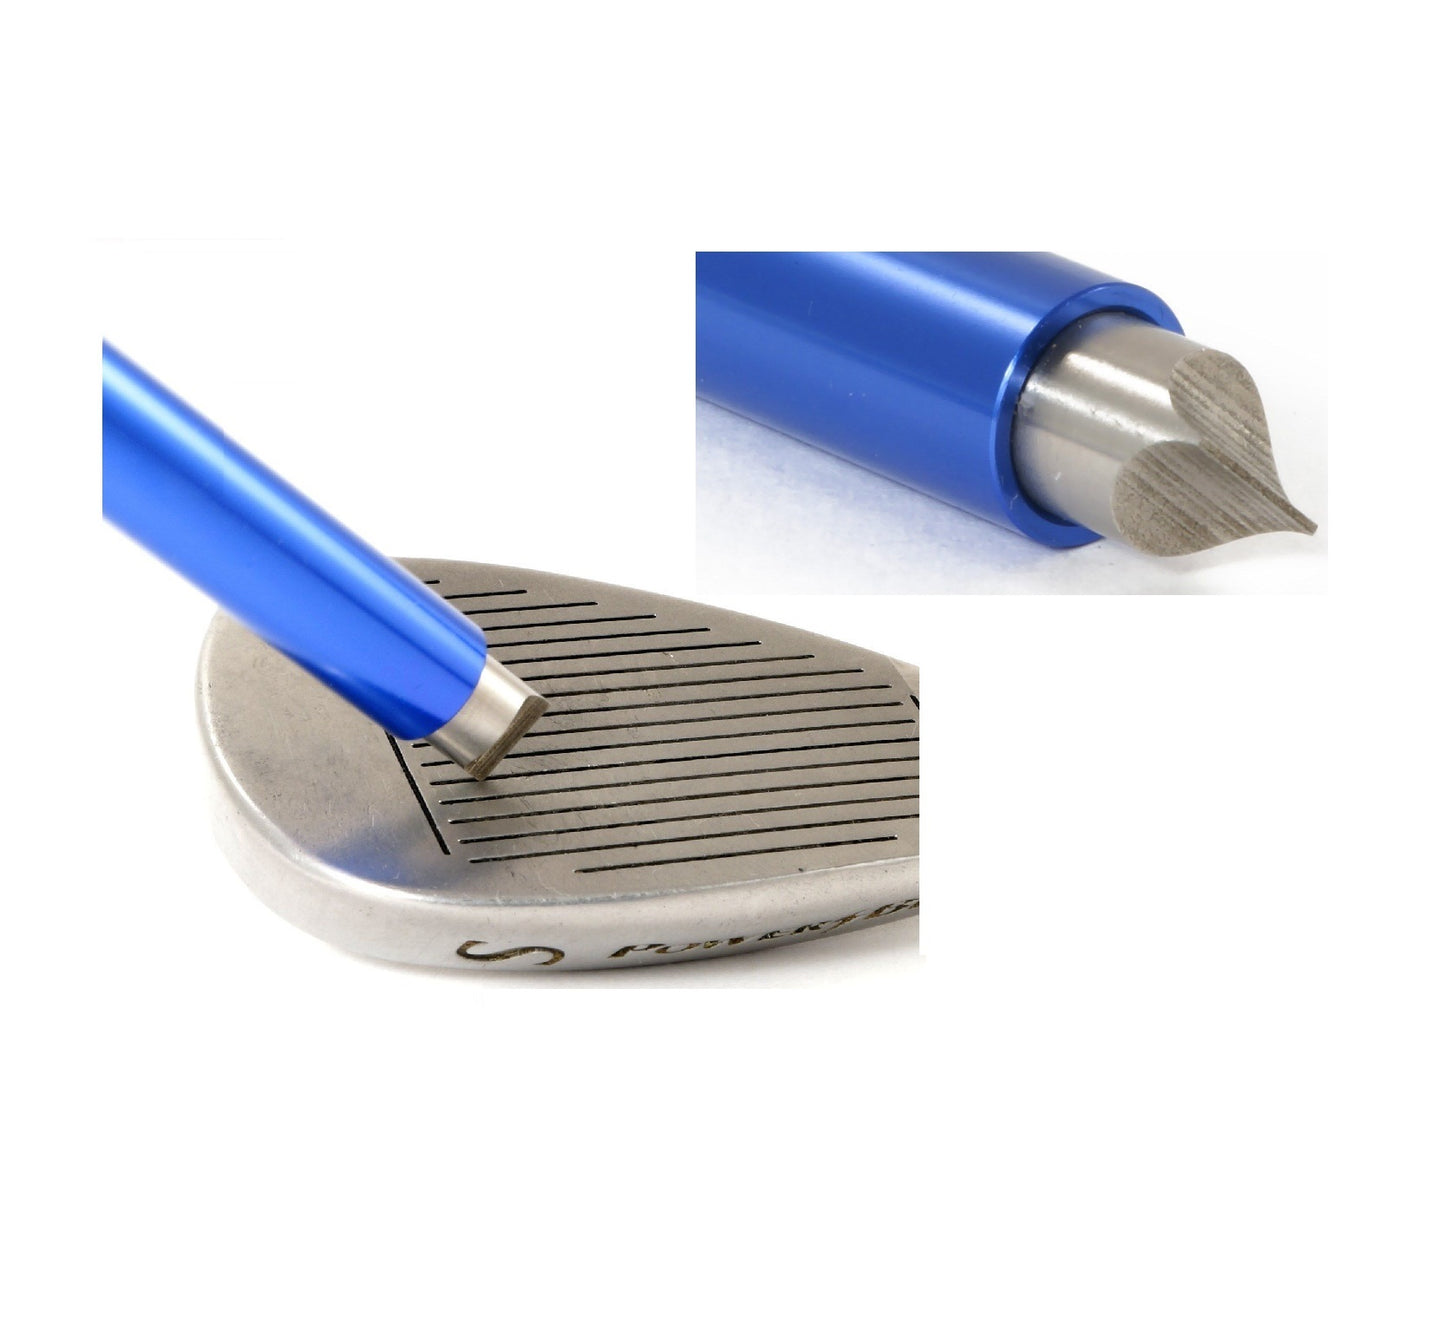 BLUE GOLF CLUB IRON WEDGE GROOVE GROOVER SHARPENER - Dont Buy Cheap Copies